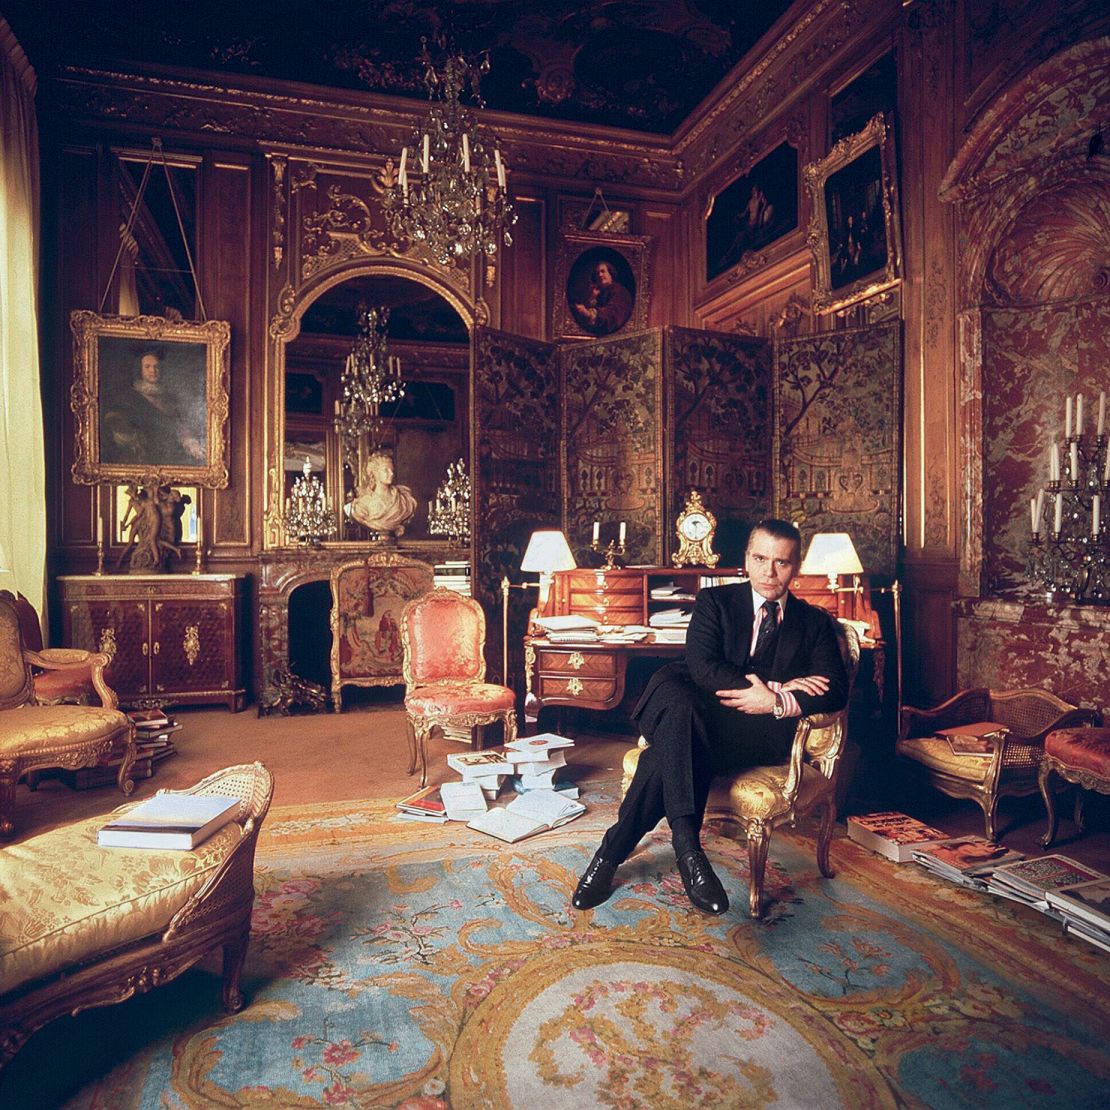 Lagerfeld in his residence in the Hôtel Pozzo di Borgo circa 1990. Across some three decades of his life, Lagerfeld lived in different parts of the building; in outfitting his homes therein, he "returned to the dreams of grandeur and elegance that had been sparked in him as a child," Kalt wrote of Lagerfeld and the <em>ancien regime</em>-worthy aesthetic on display.